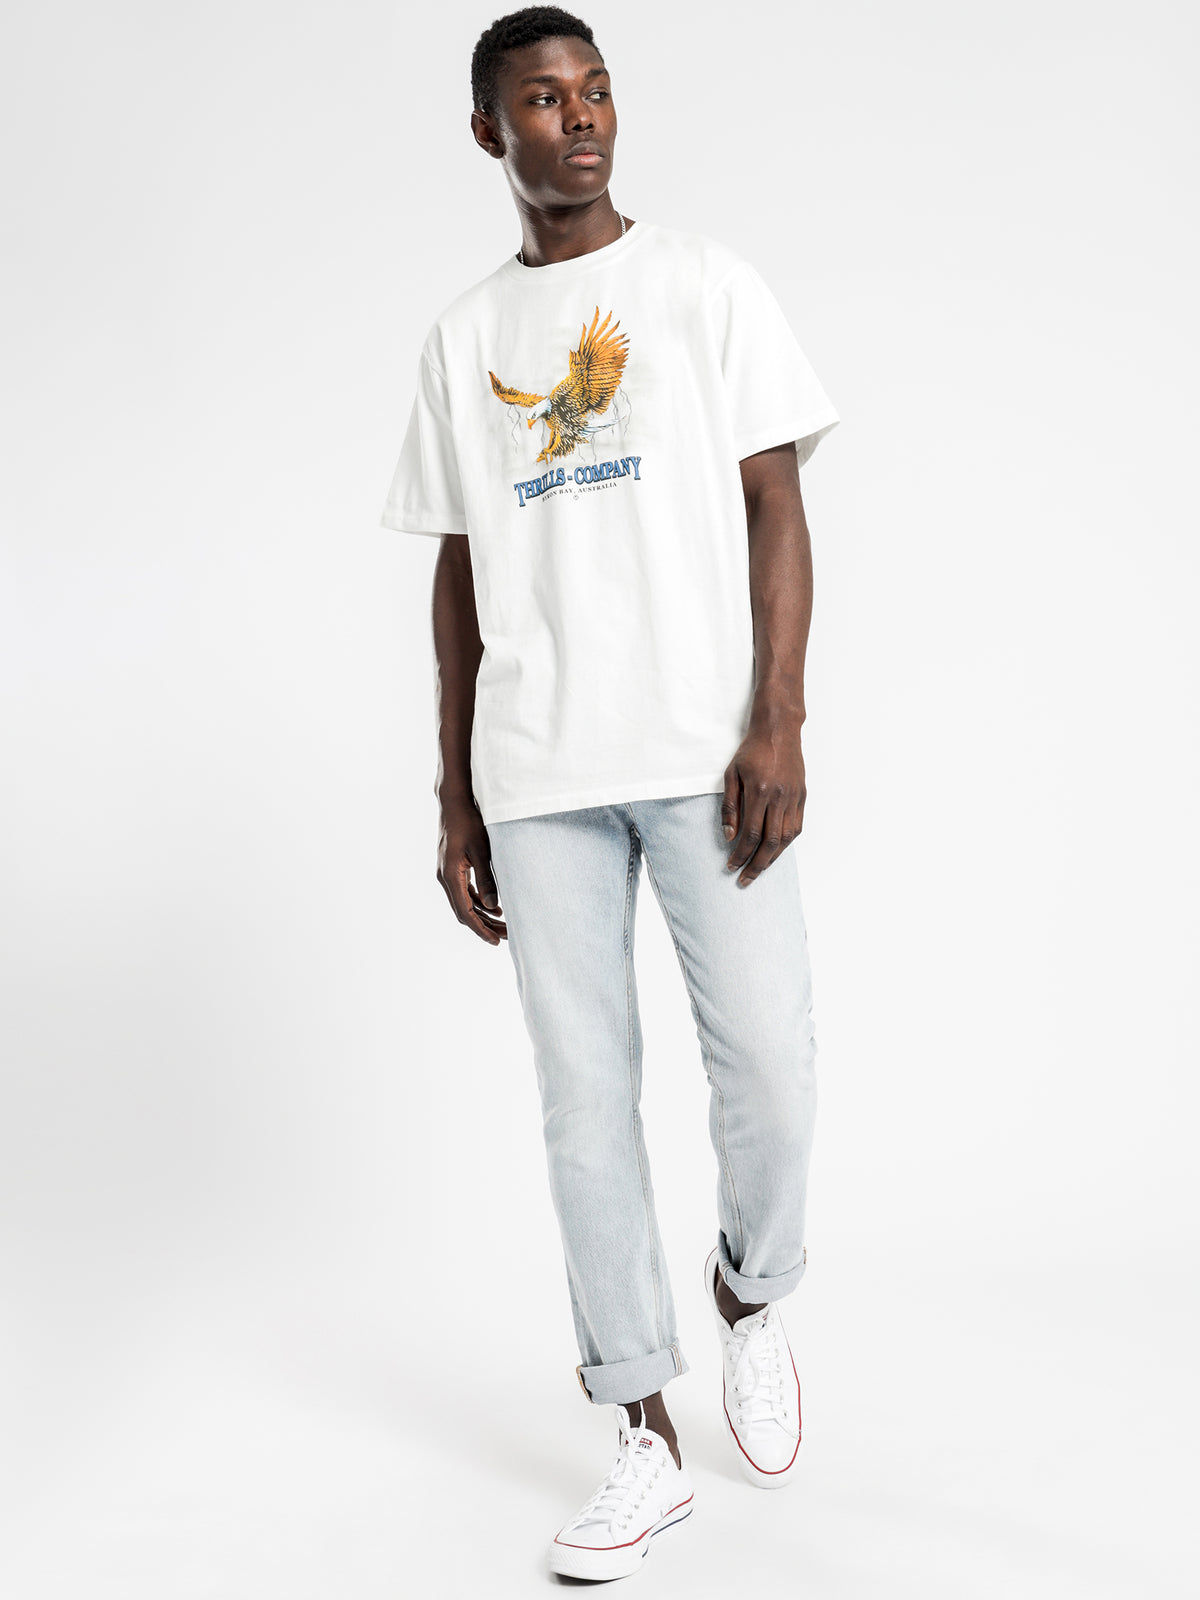 Soaring Eagle Merch Fit T-shirt in White